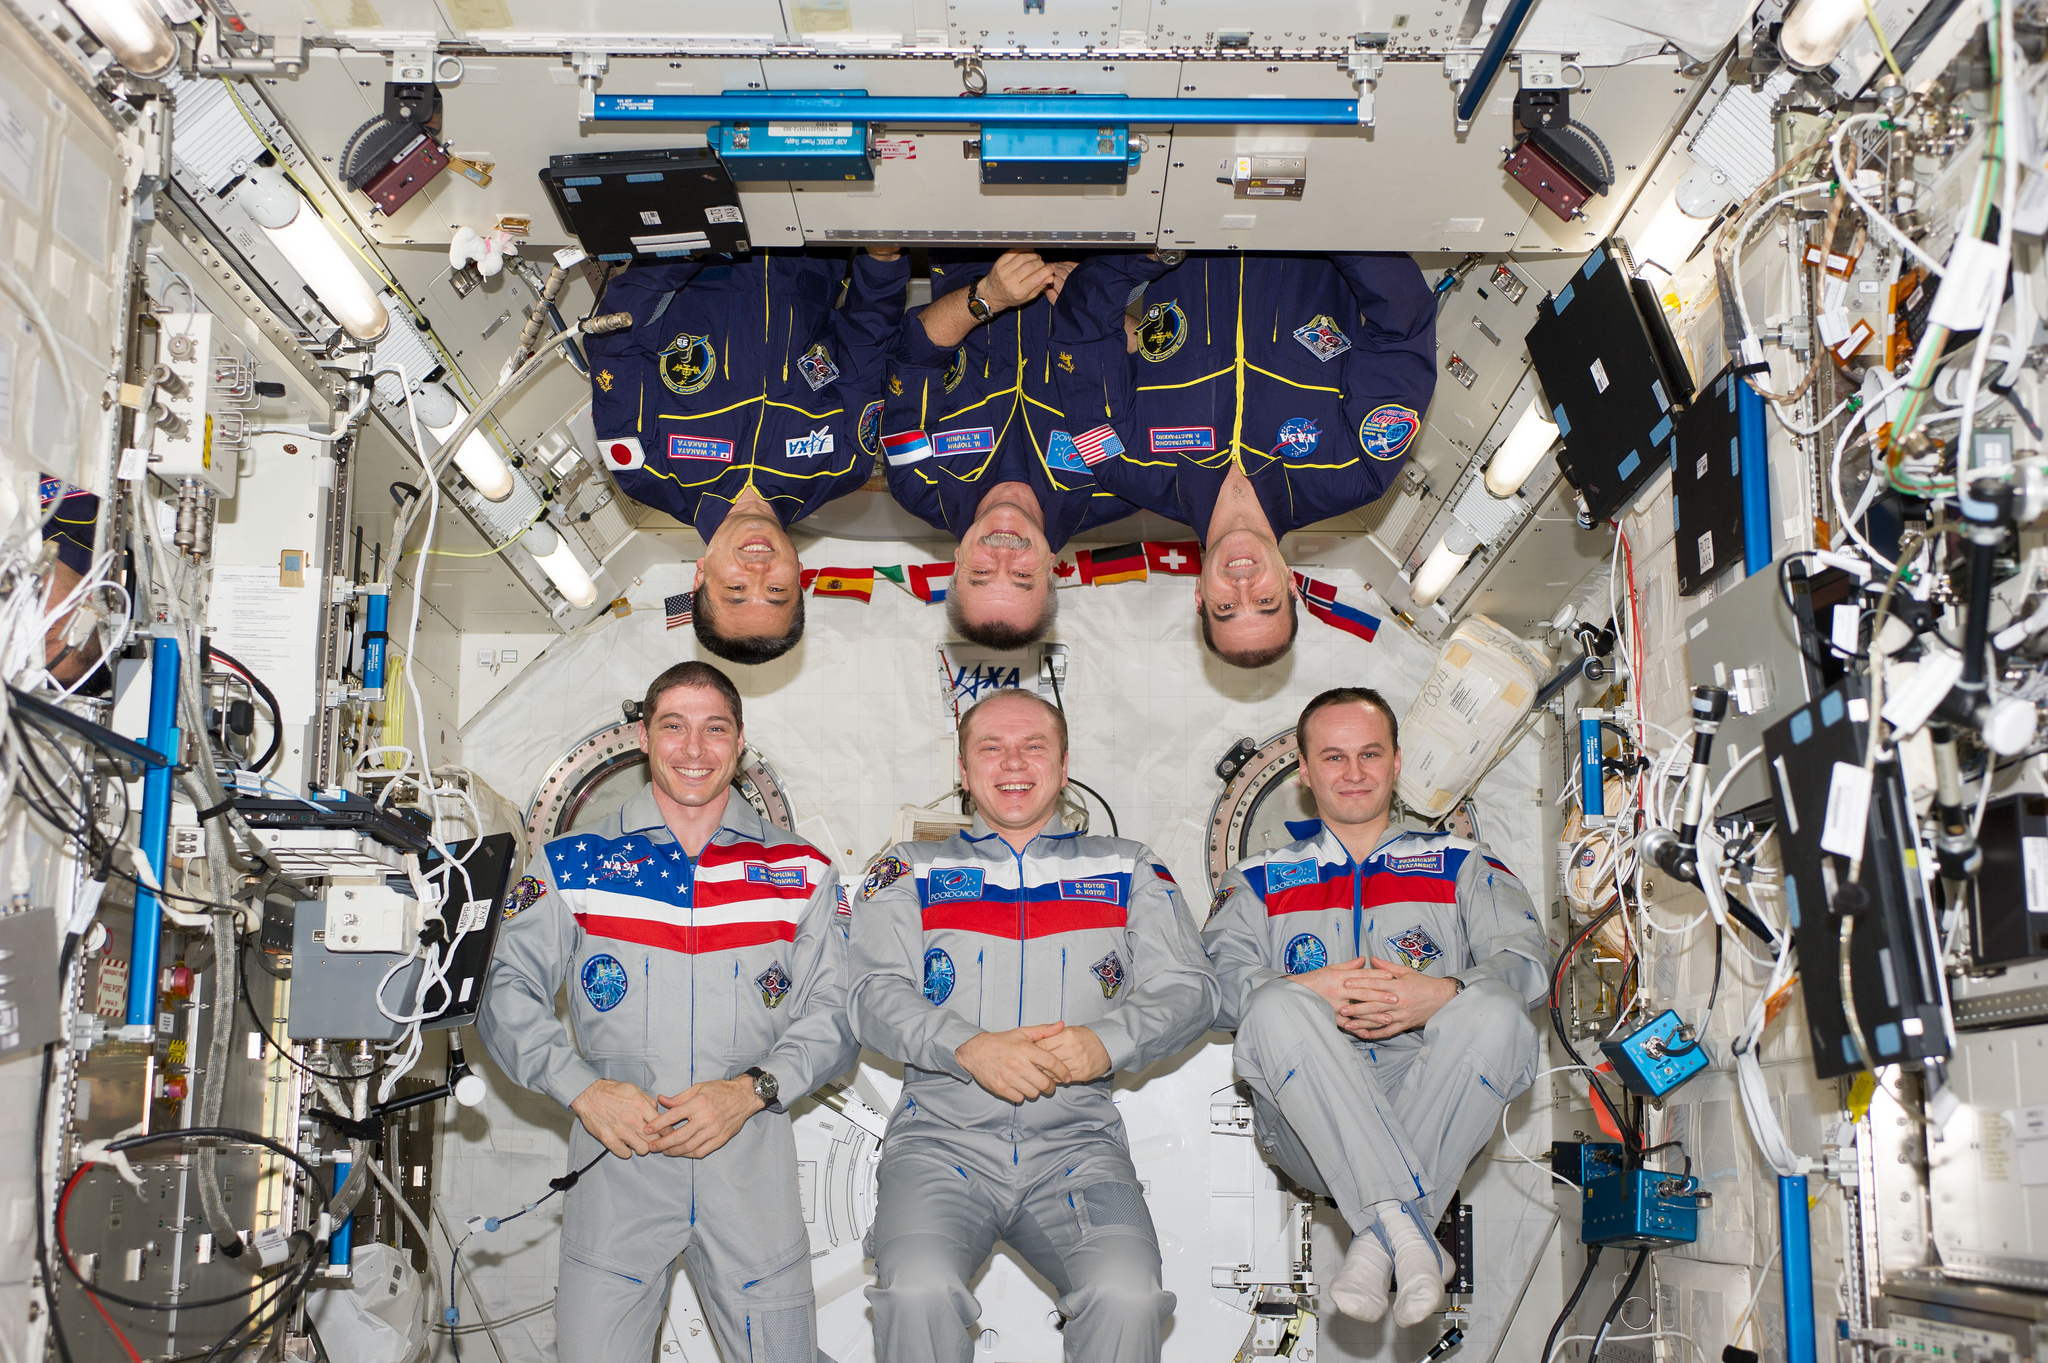 Outgoing Expedition 38 crewmen (bottom row, left to right) Mike Hopkins, Oleg Kotov and Sergei Ryazansky) are pictured with their new Expedition 39 comrades (top row, left to right) Koichi Wakata, Mikhail Tyurin and Rick Mastracchio. The two crews have worked together as members of Expedition 38 since November 2013. Now, Wakata will lead the station until mid-May. Photo Credit: NASA